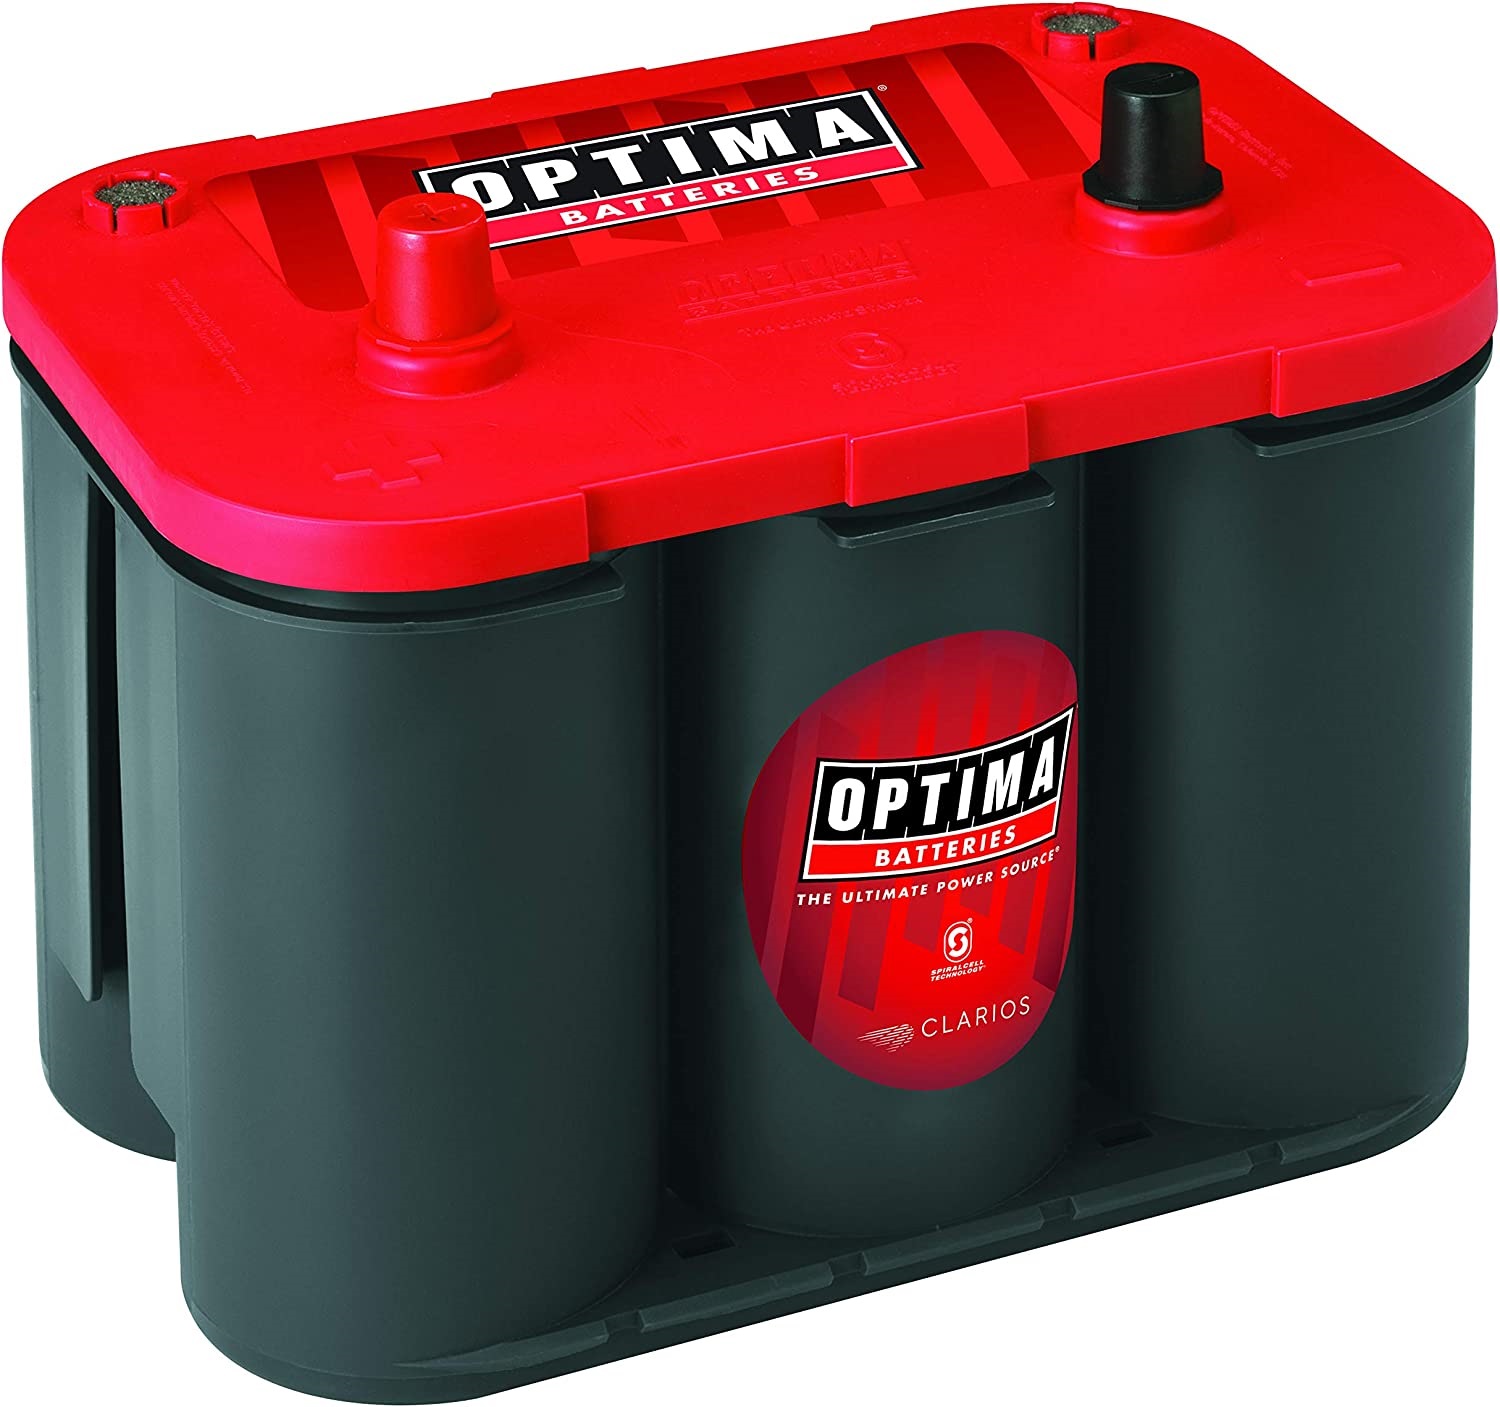 OPTIMA Red Top Battery Group Size: 34 - 8002-002 Replacement for AutoAnything 3728298 4